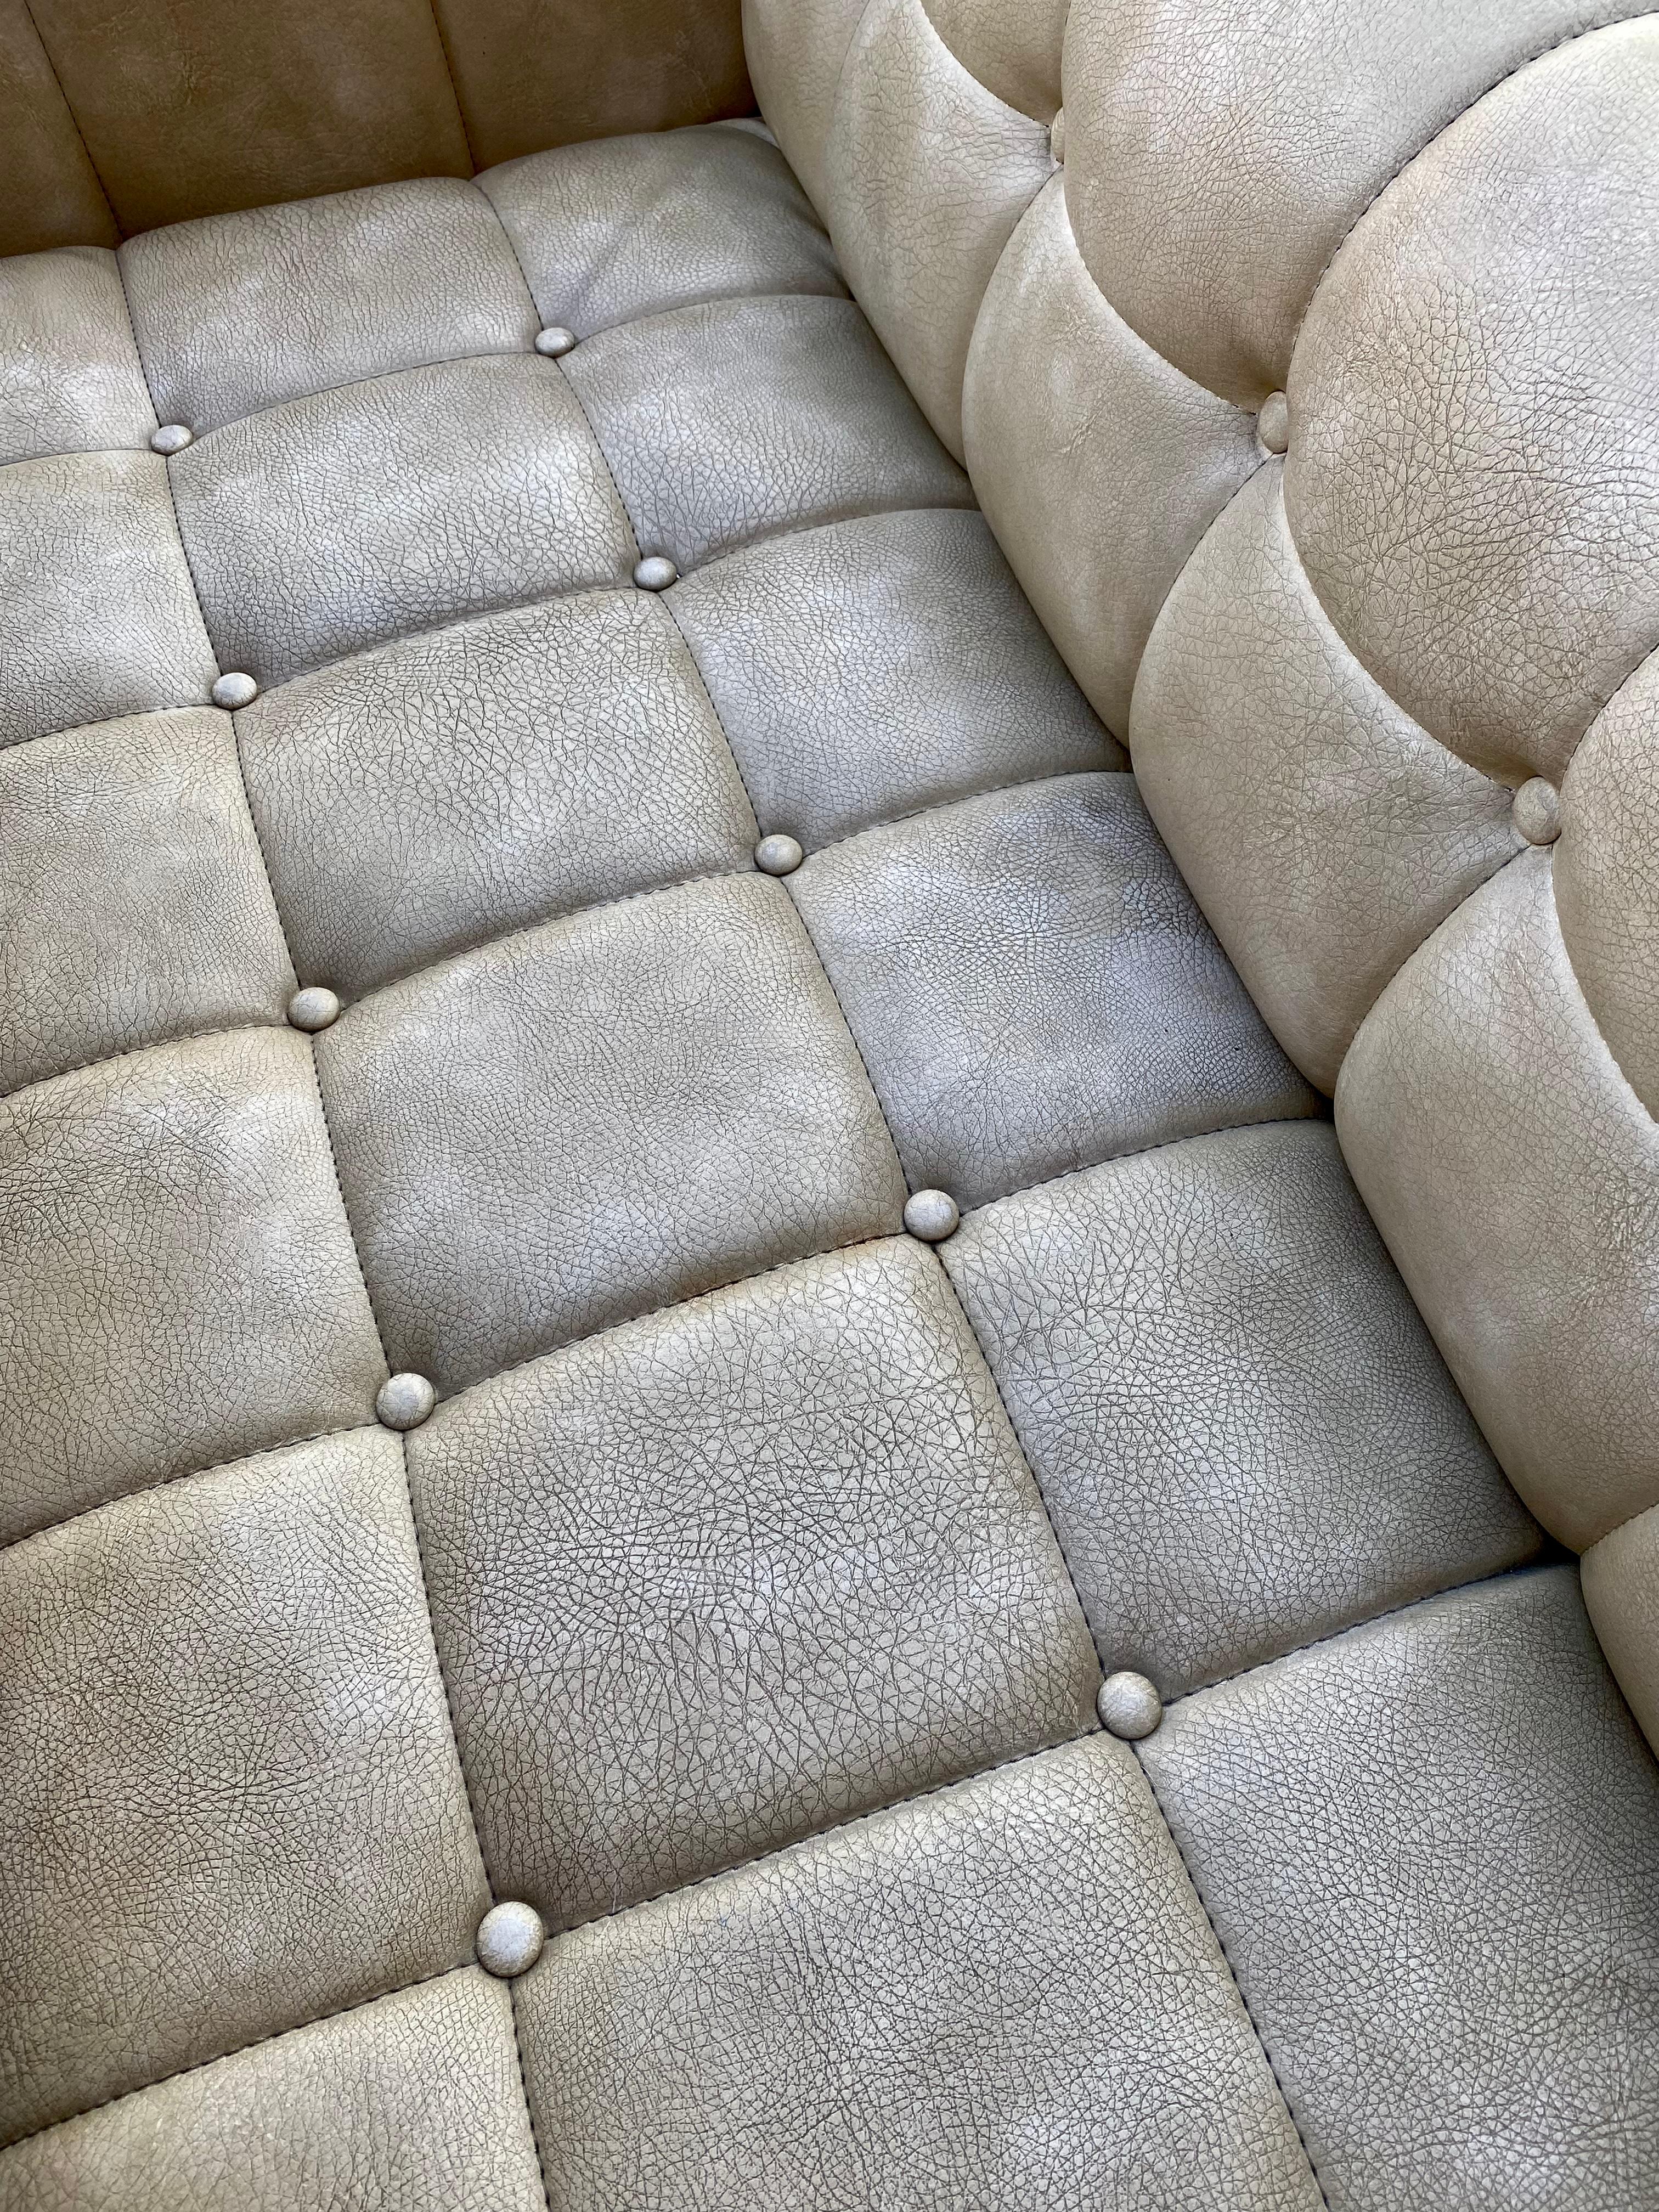 1960s Milo Baughman Style Button-Tufted Biscuit Distressed Sofa For Sale 7